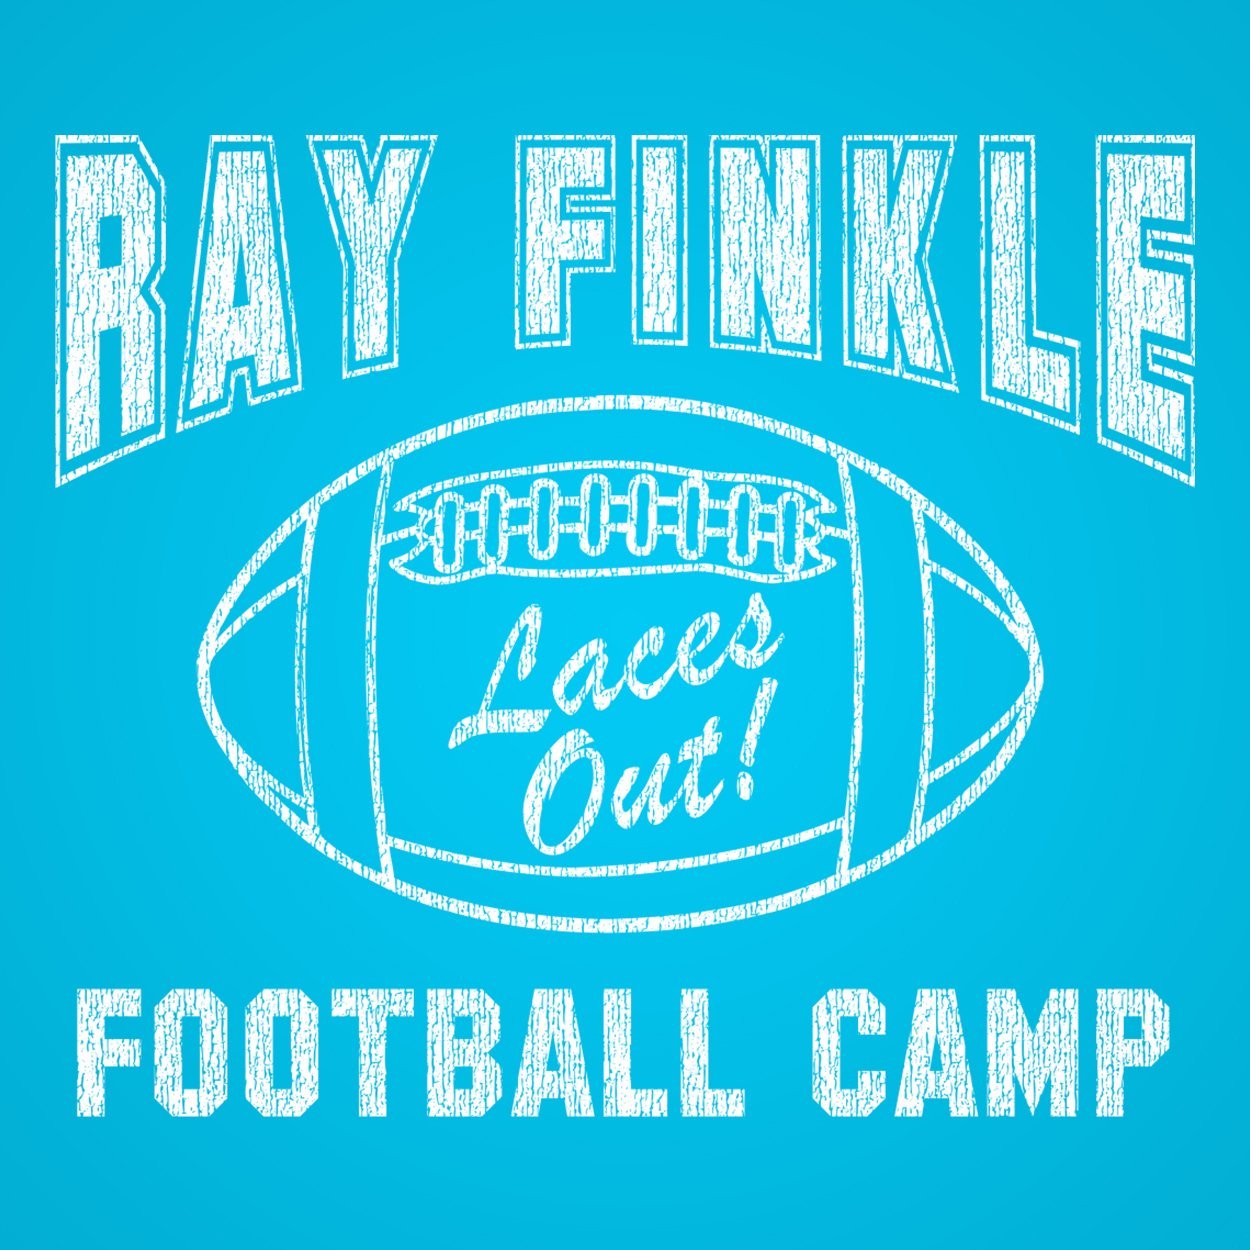 Ray Finkle Football Camp Laces Out Women's Relaxed Fit Tri-Blend T-Shirt